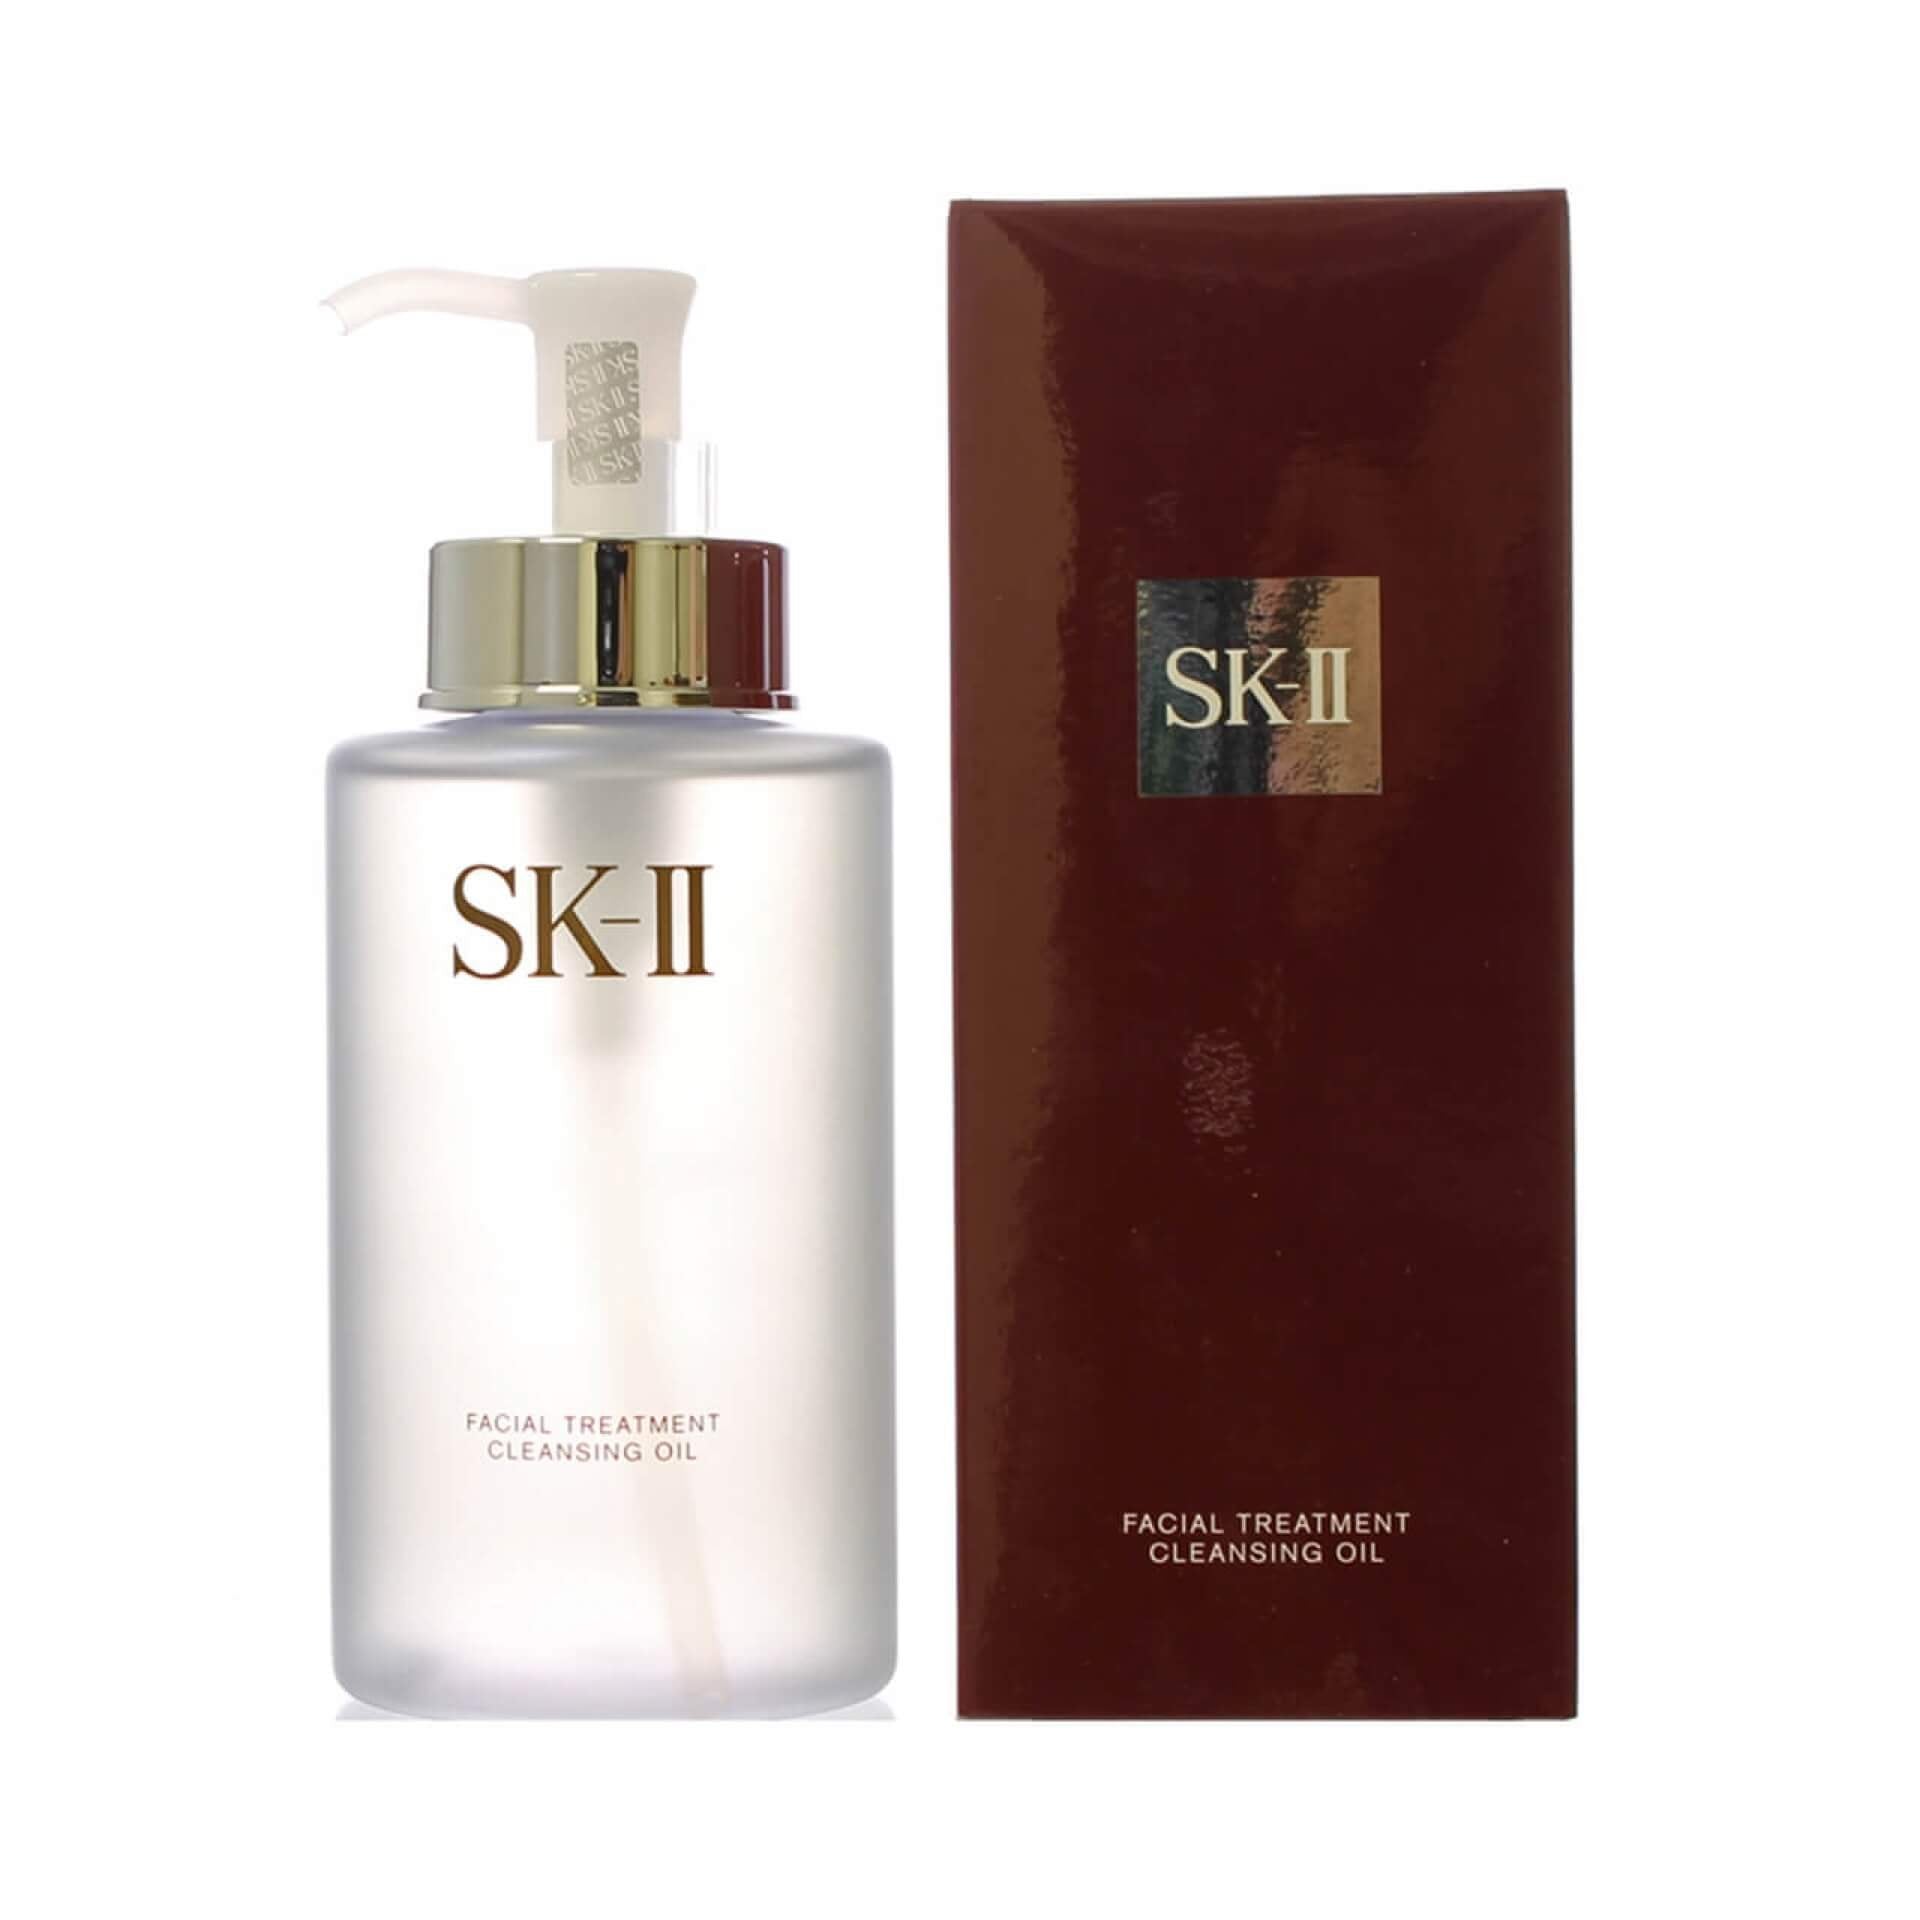 SK-II Facial Treatment Cleansing Oil Pitera Essence Makeup Cleanser 250ml